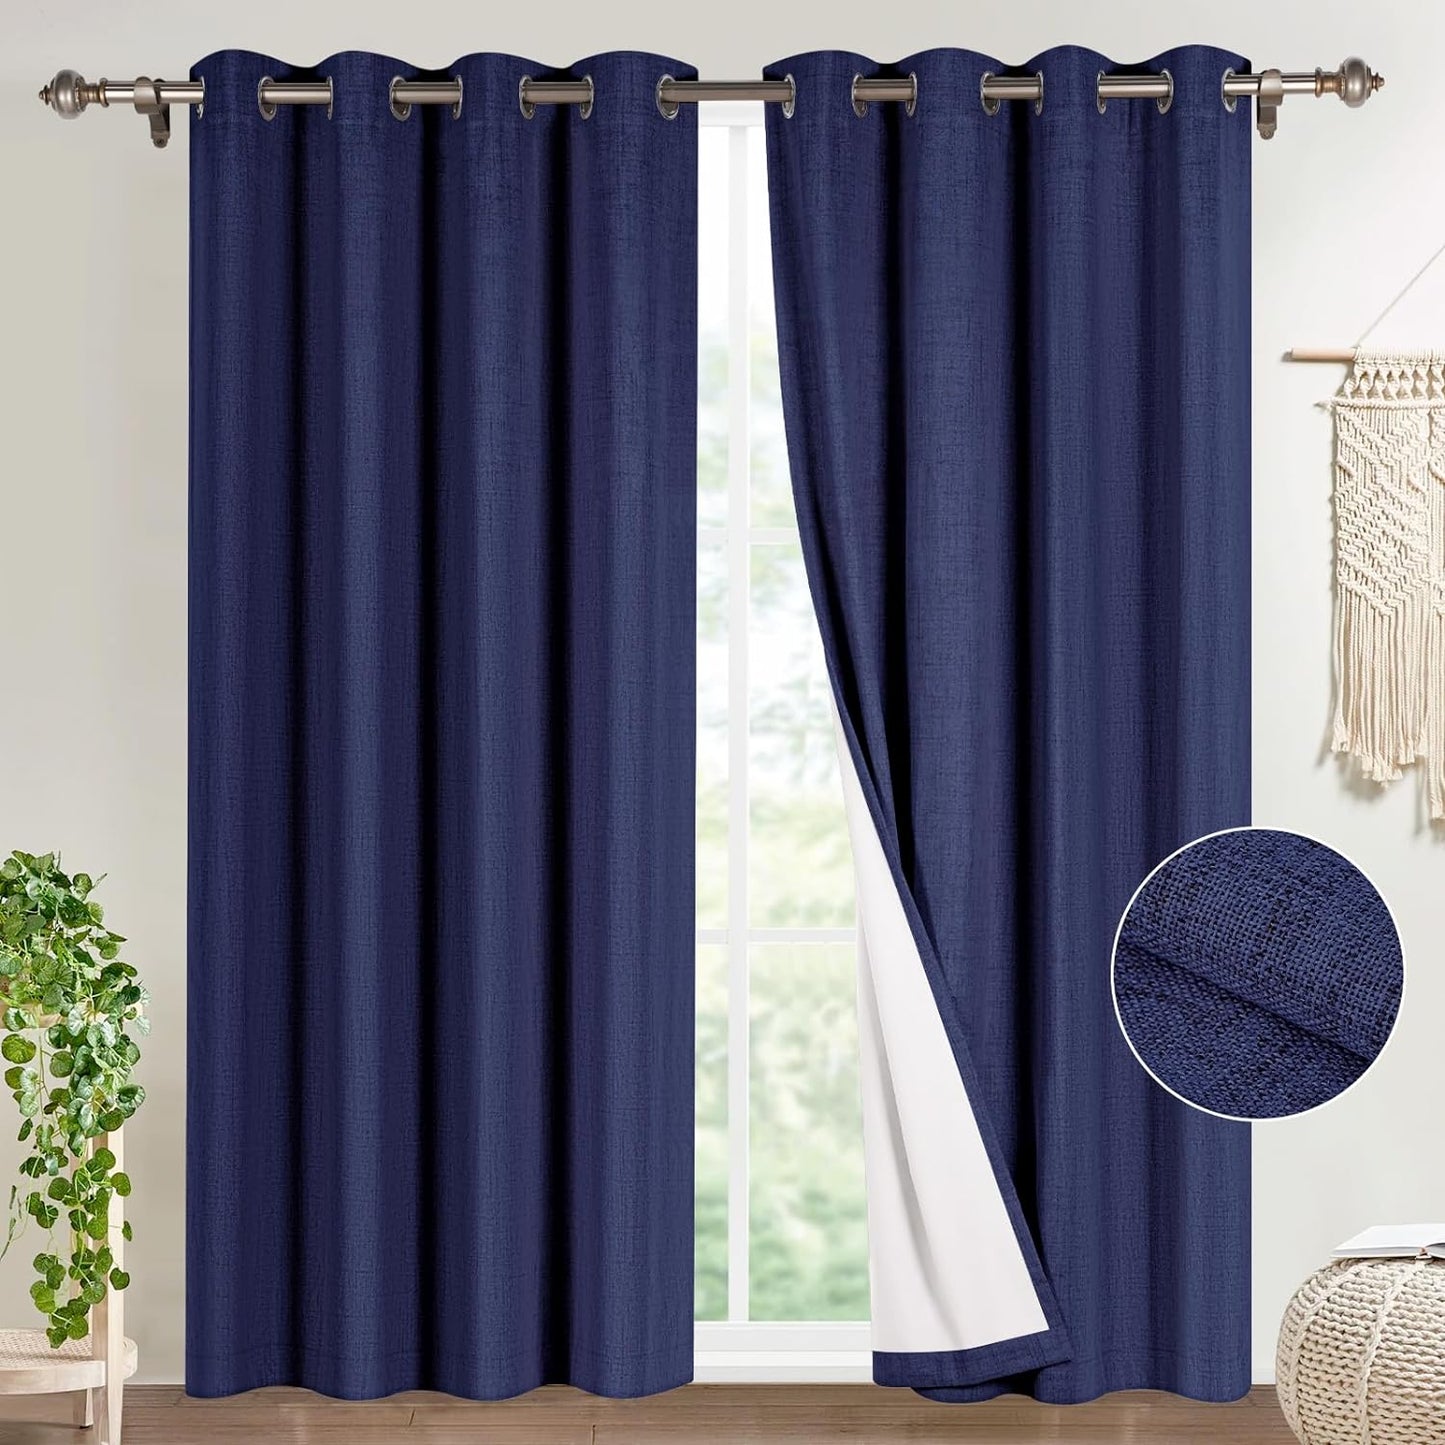 Timeles 100% Blackout Window Curtains 84 Inch Length for Living Room Textured Linen Curtains Sliver Grommet Pinch Pleated Room Darkening Curtain with White Liner/Ties(2 Panel W52 X L84, Ivory)  Timeles Navy Blue W52" X L84" 